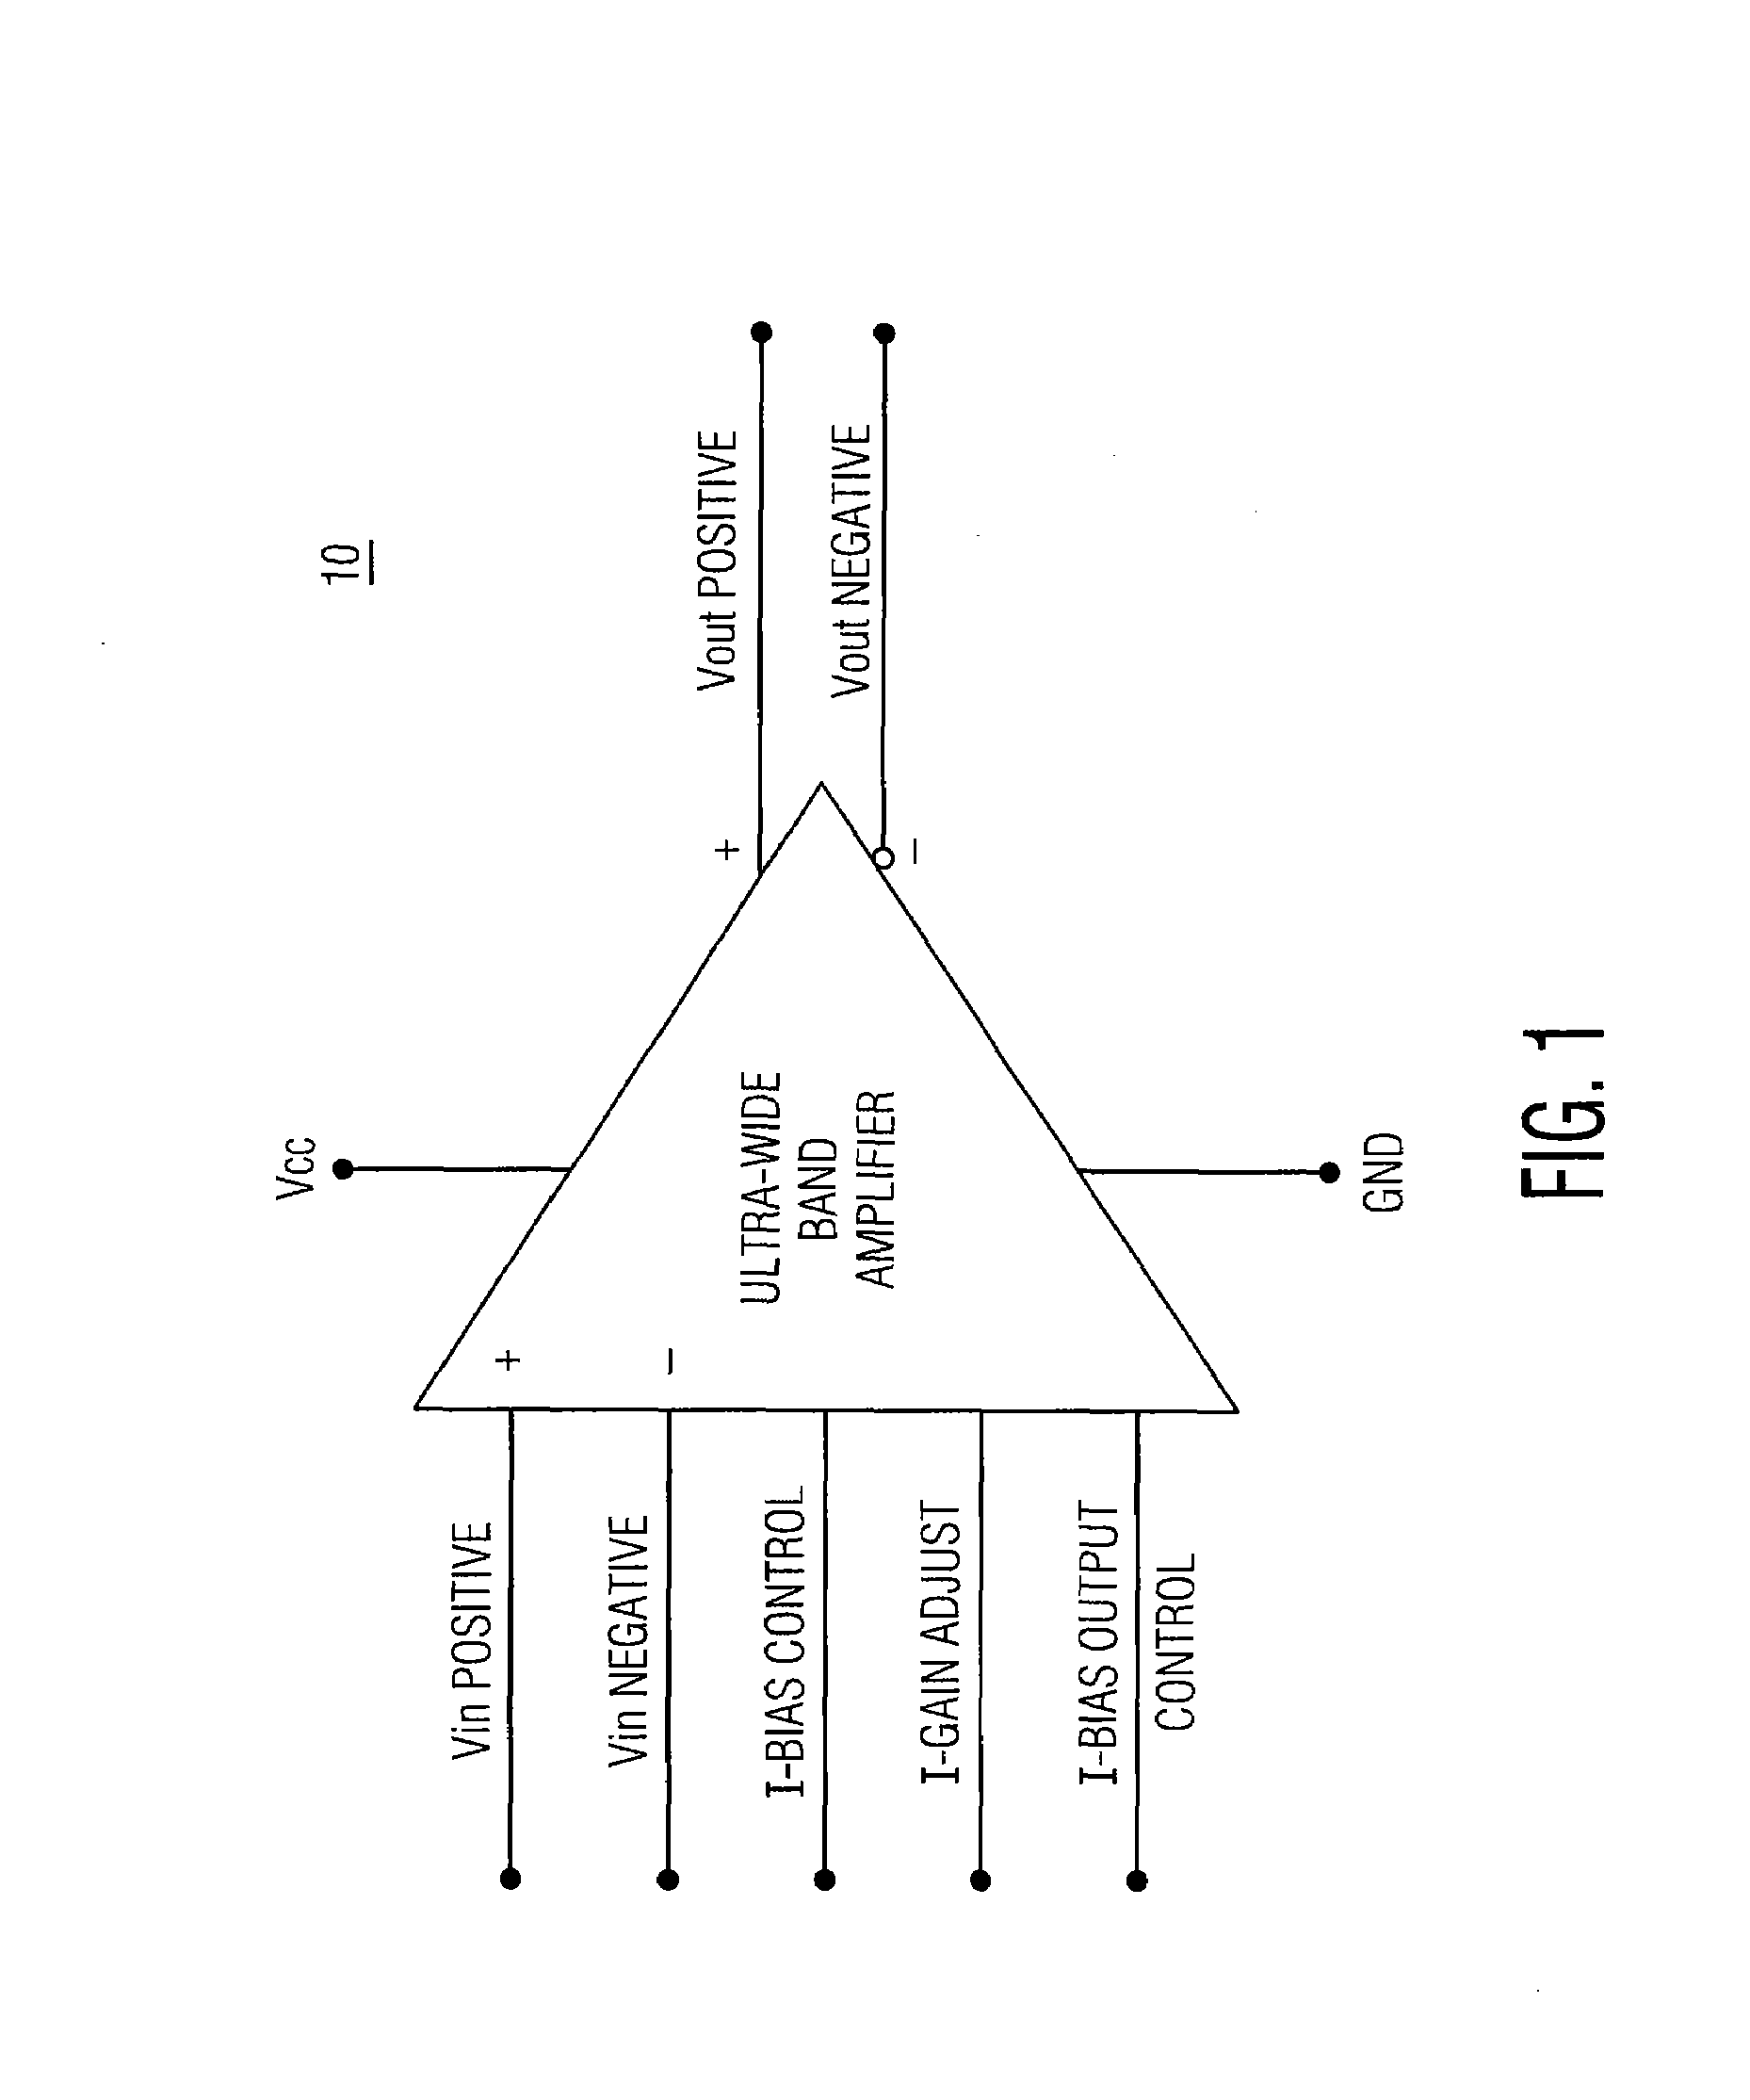 Ultra wide band, differential input/output, high frequency amplifier in an integrated circuit